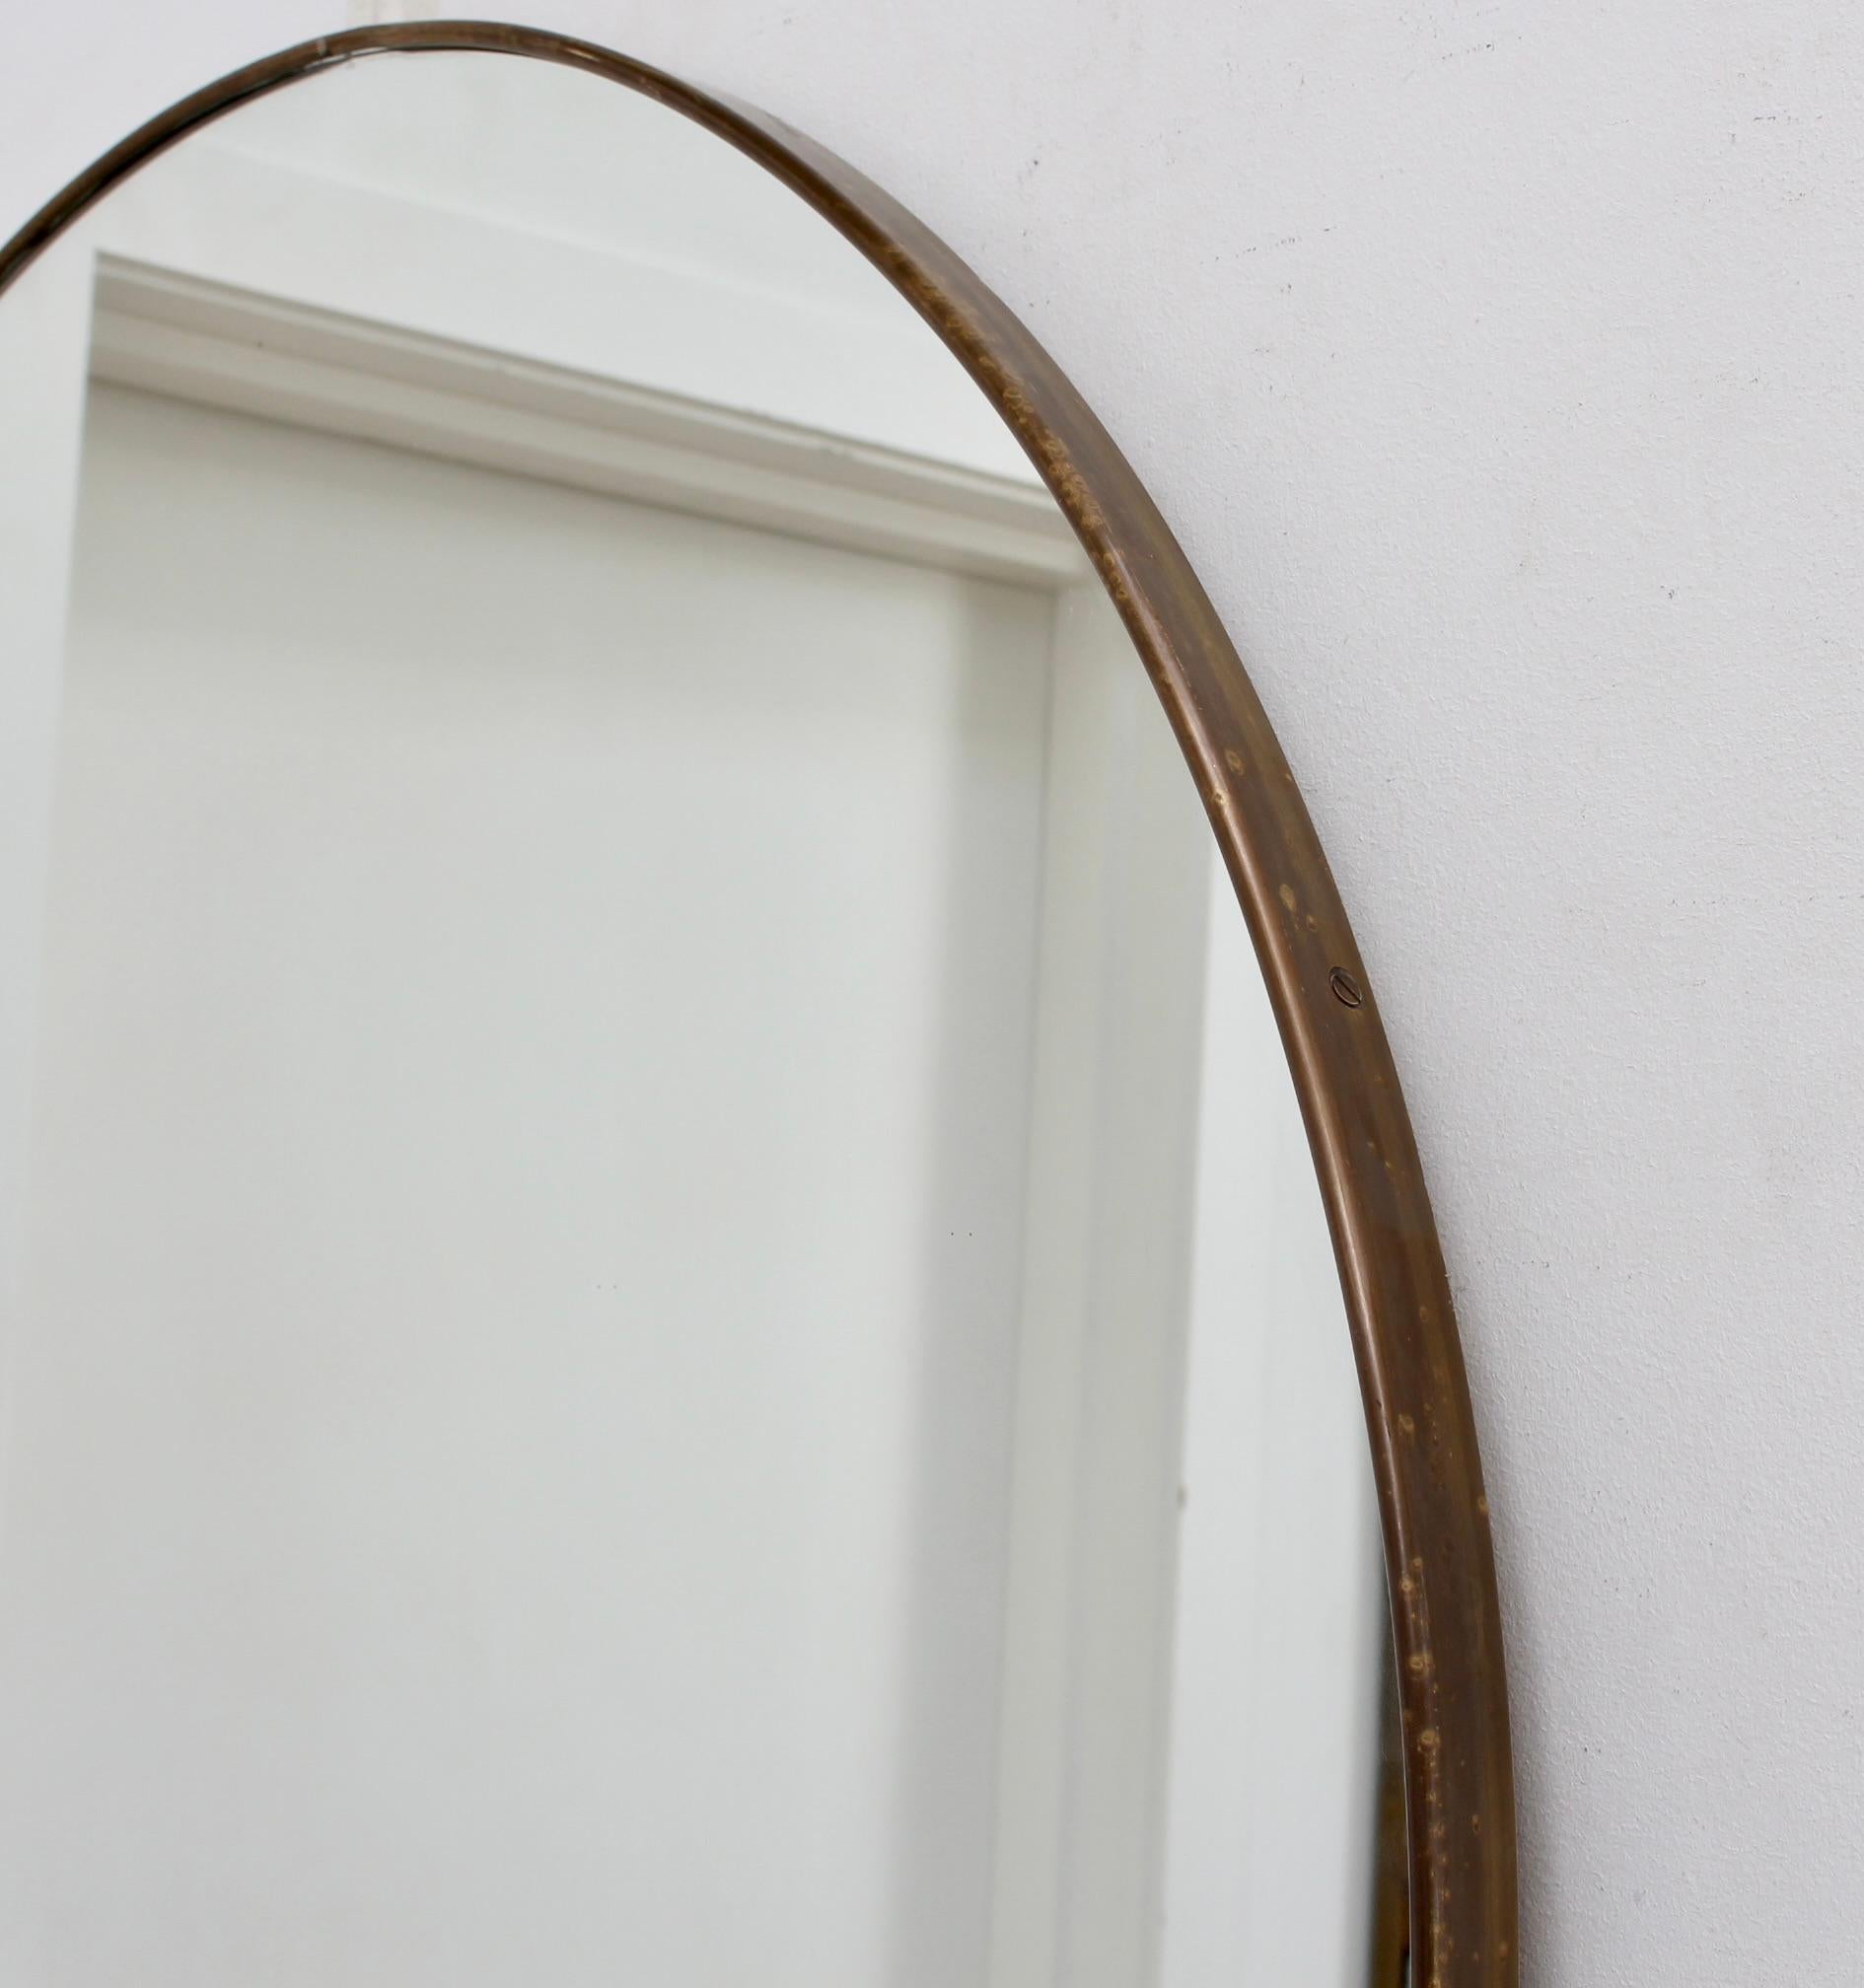 Vintage Italian Round Wall Mirror with Brass Frame (circa 1960s) - Large For Sale 7